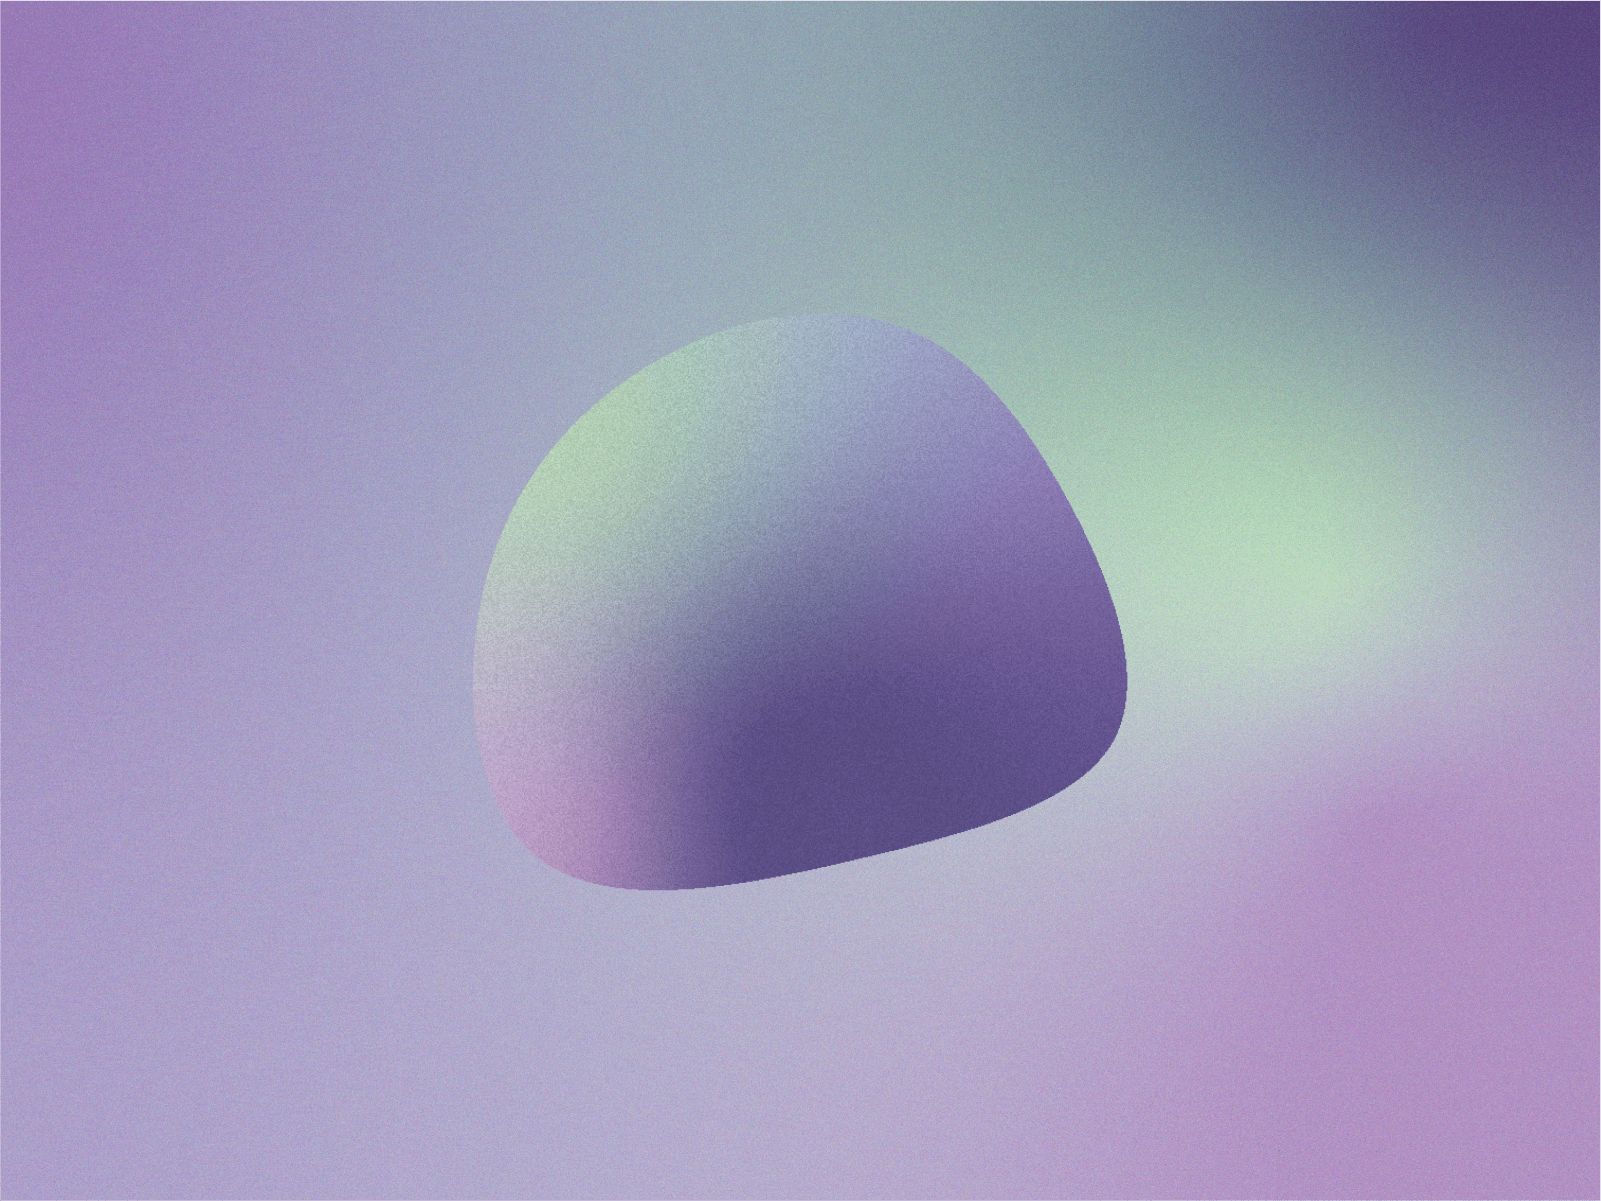 Pastel purple and blue orb against a lavender background.